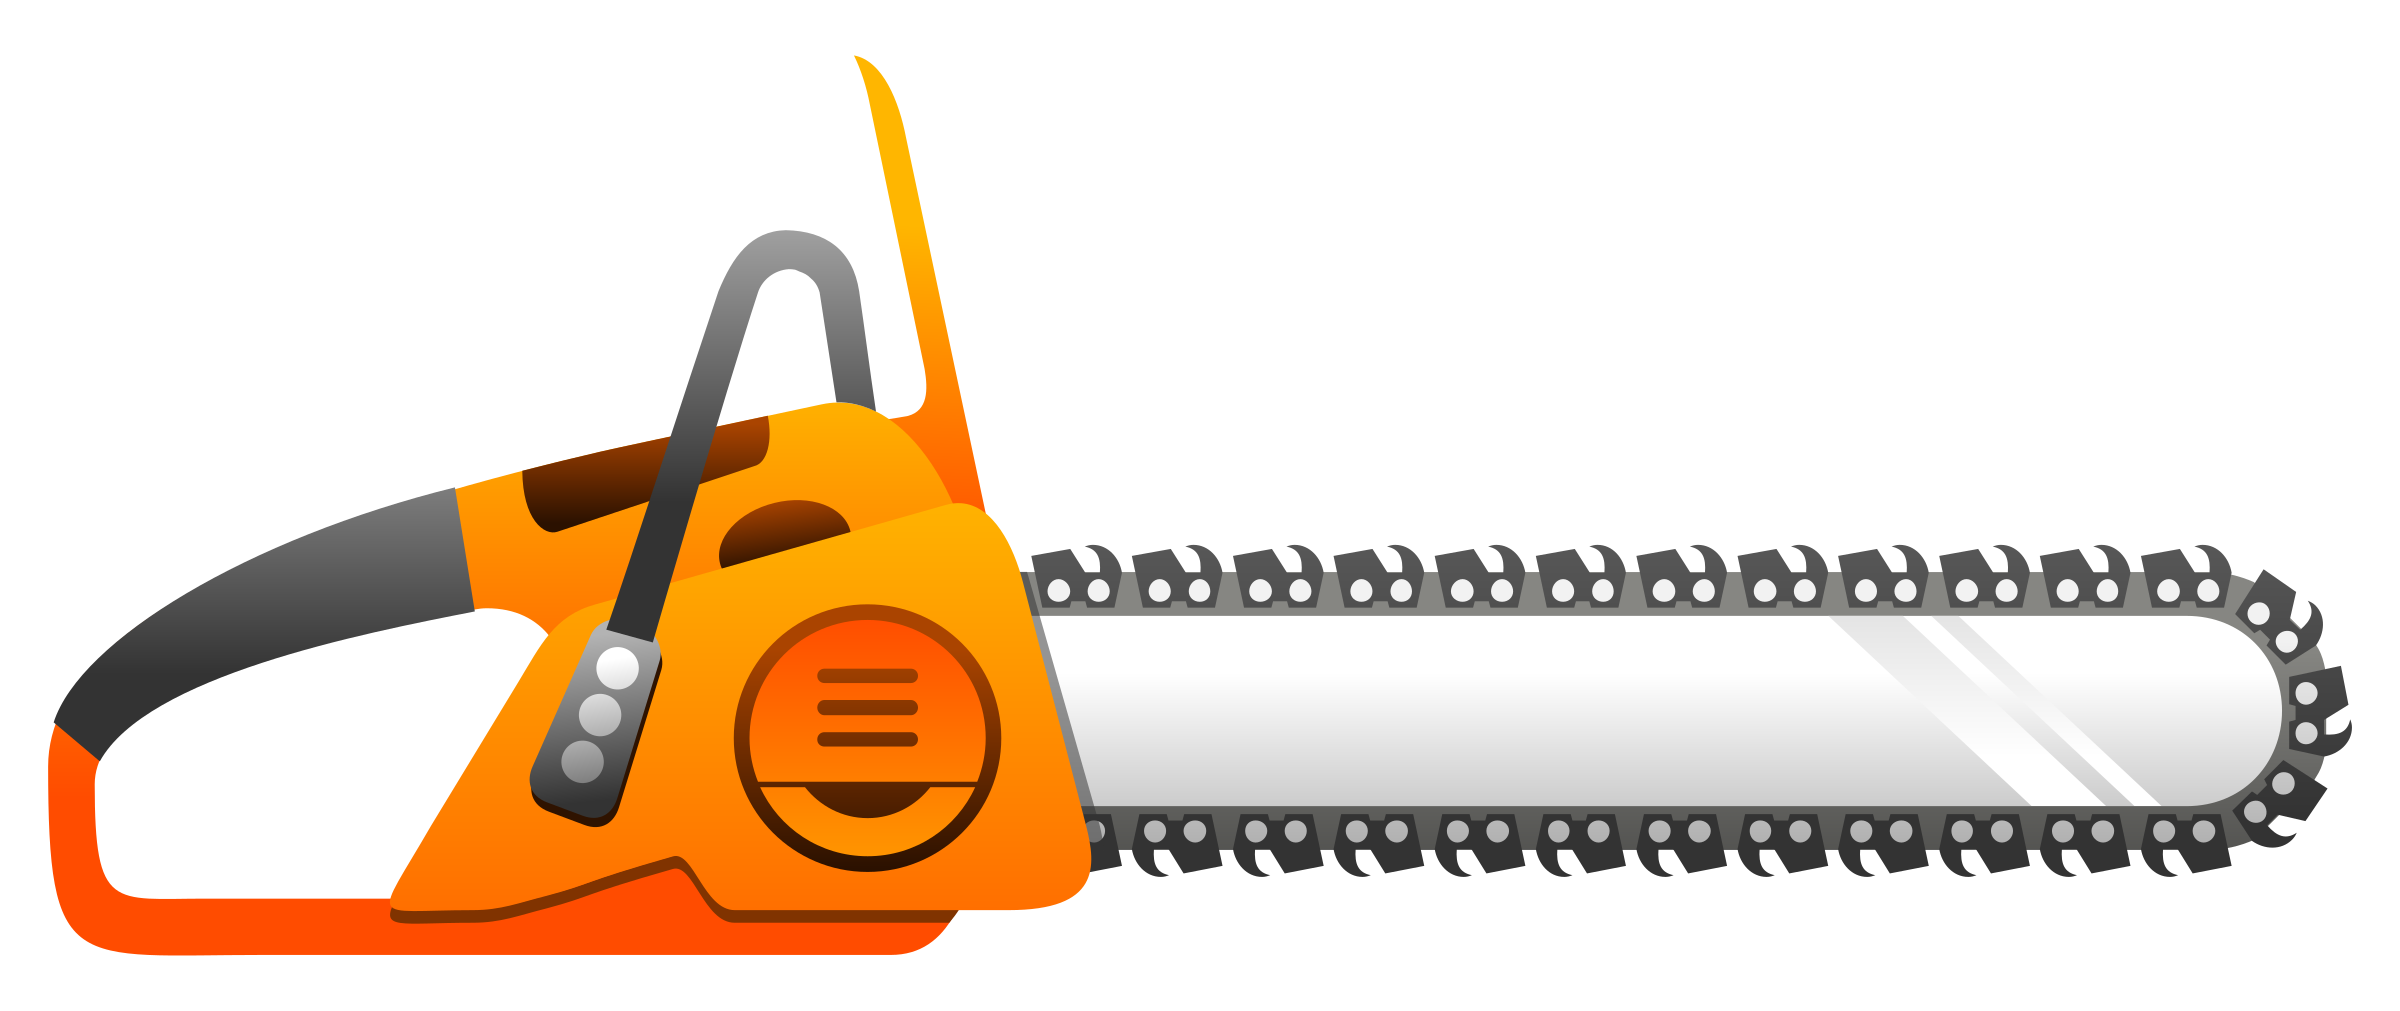 Chainsaw Vector PNG Image High Quality PNG Image